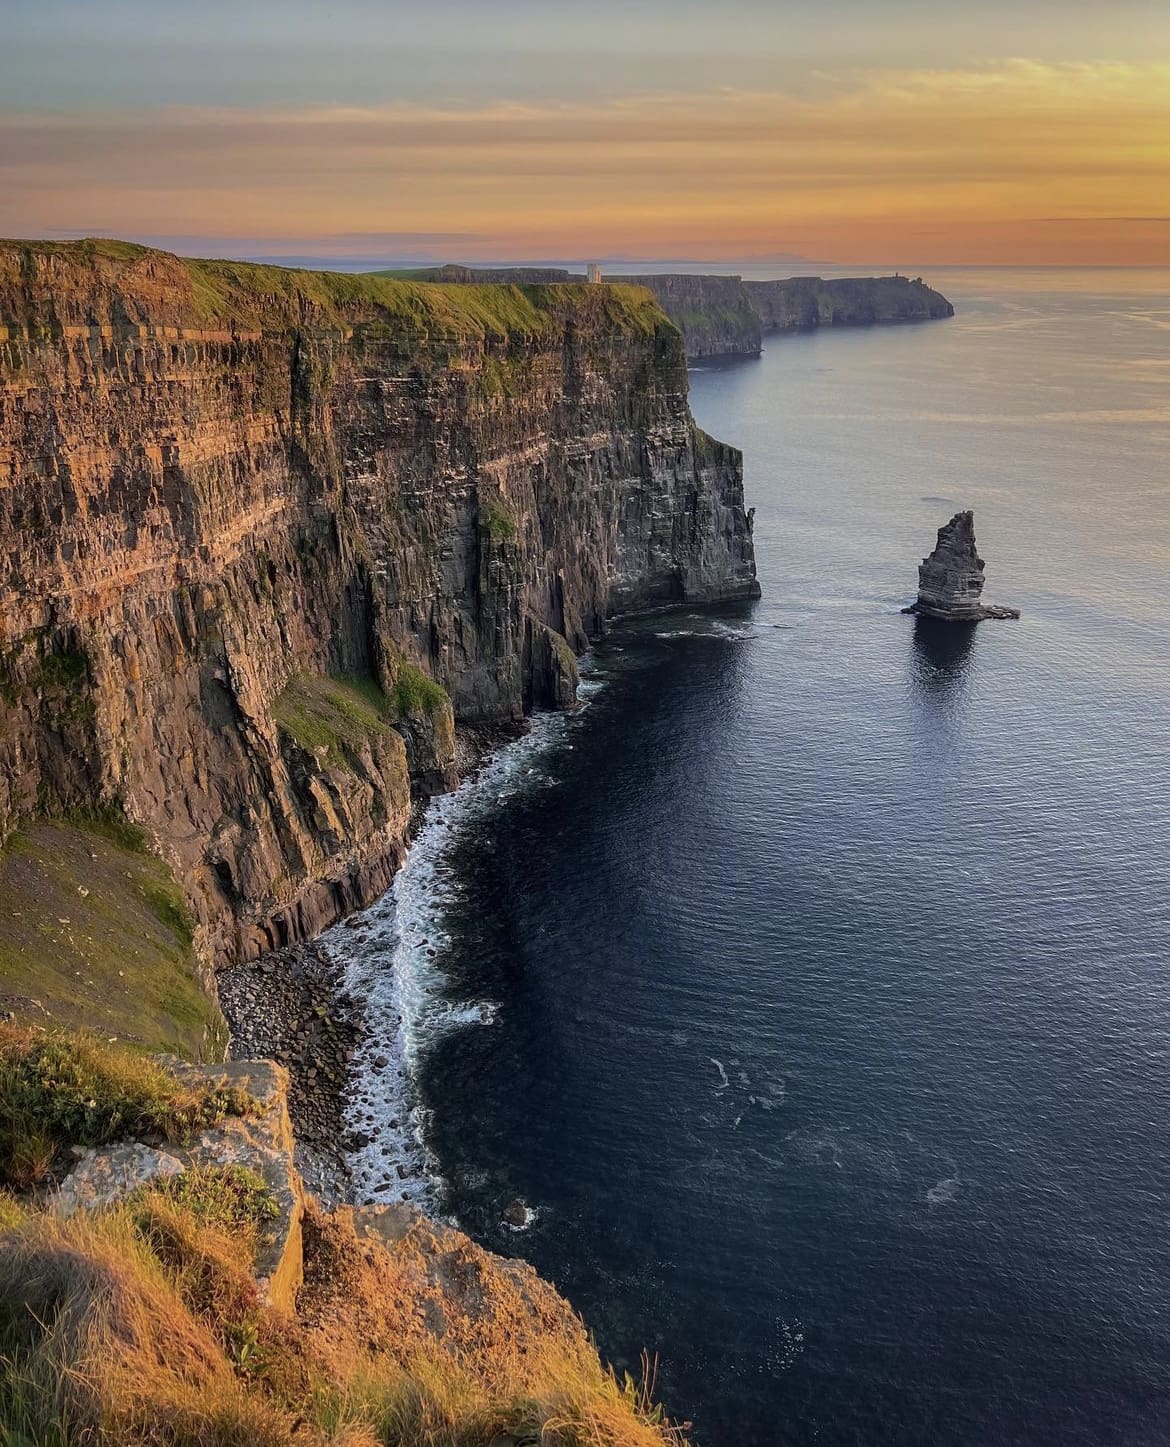 Picturesque sunset over the cliffs of moher and atlantic ocean - The 22 Best Things to do in Ireland